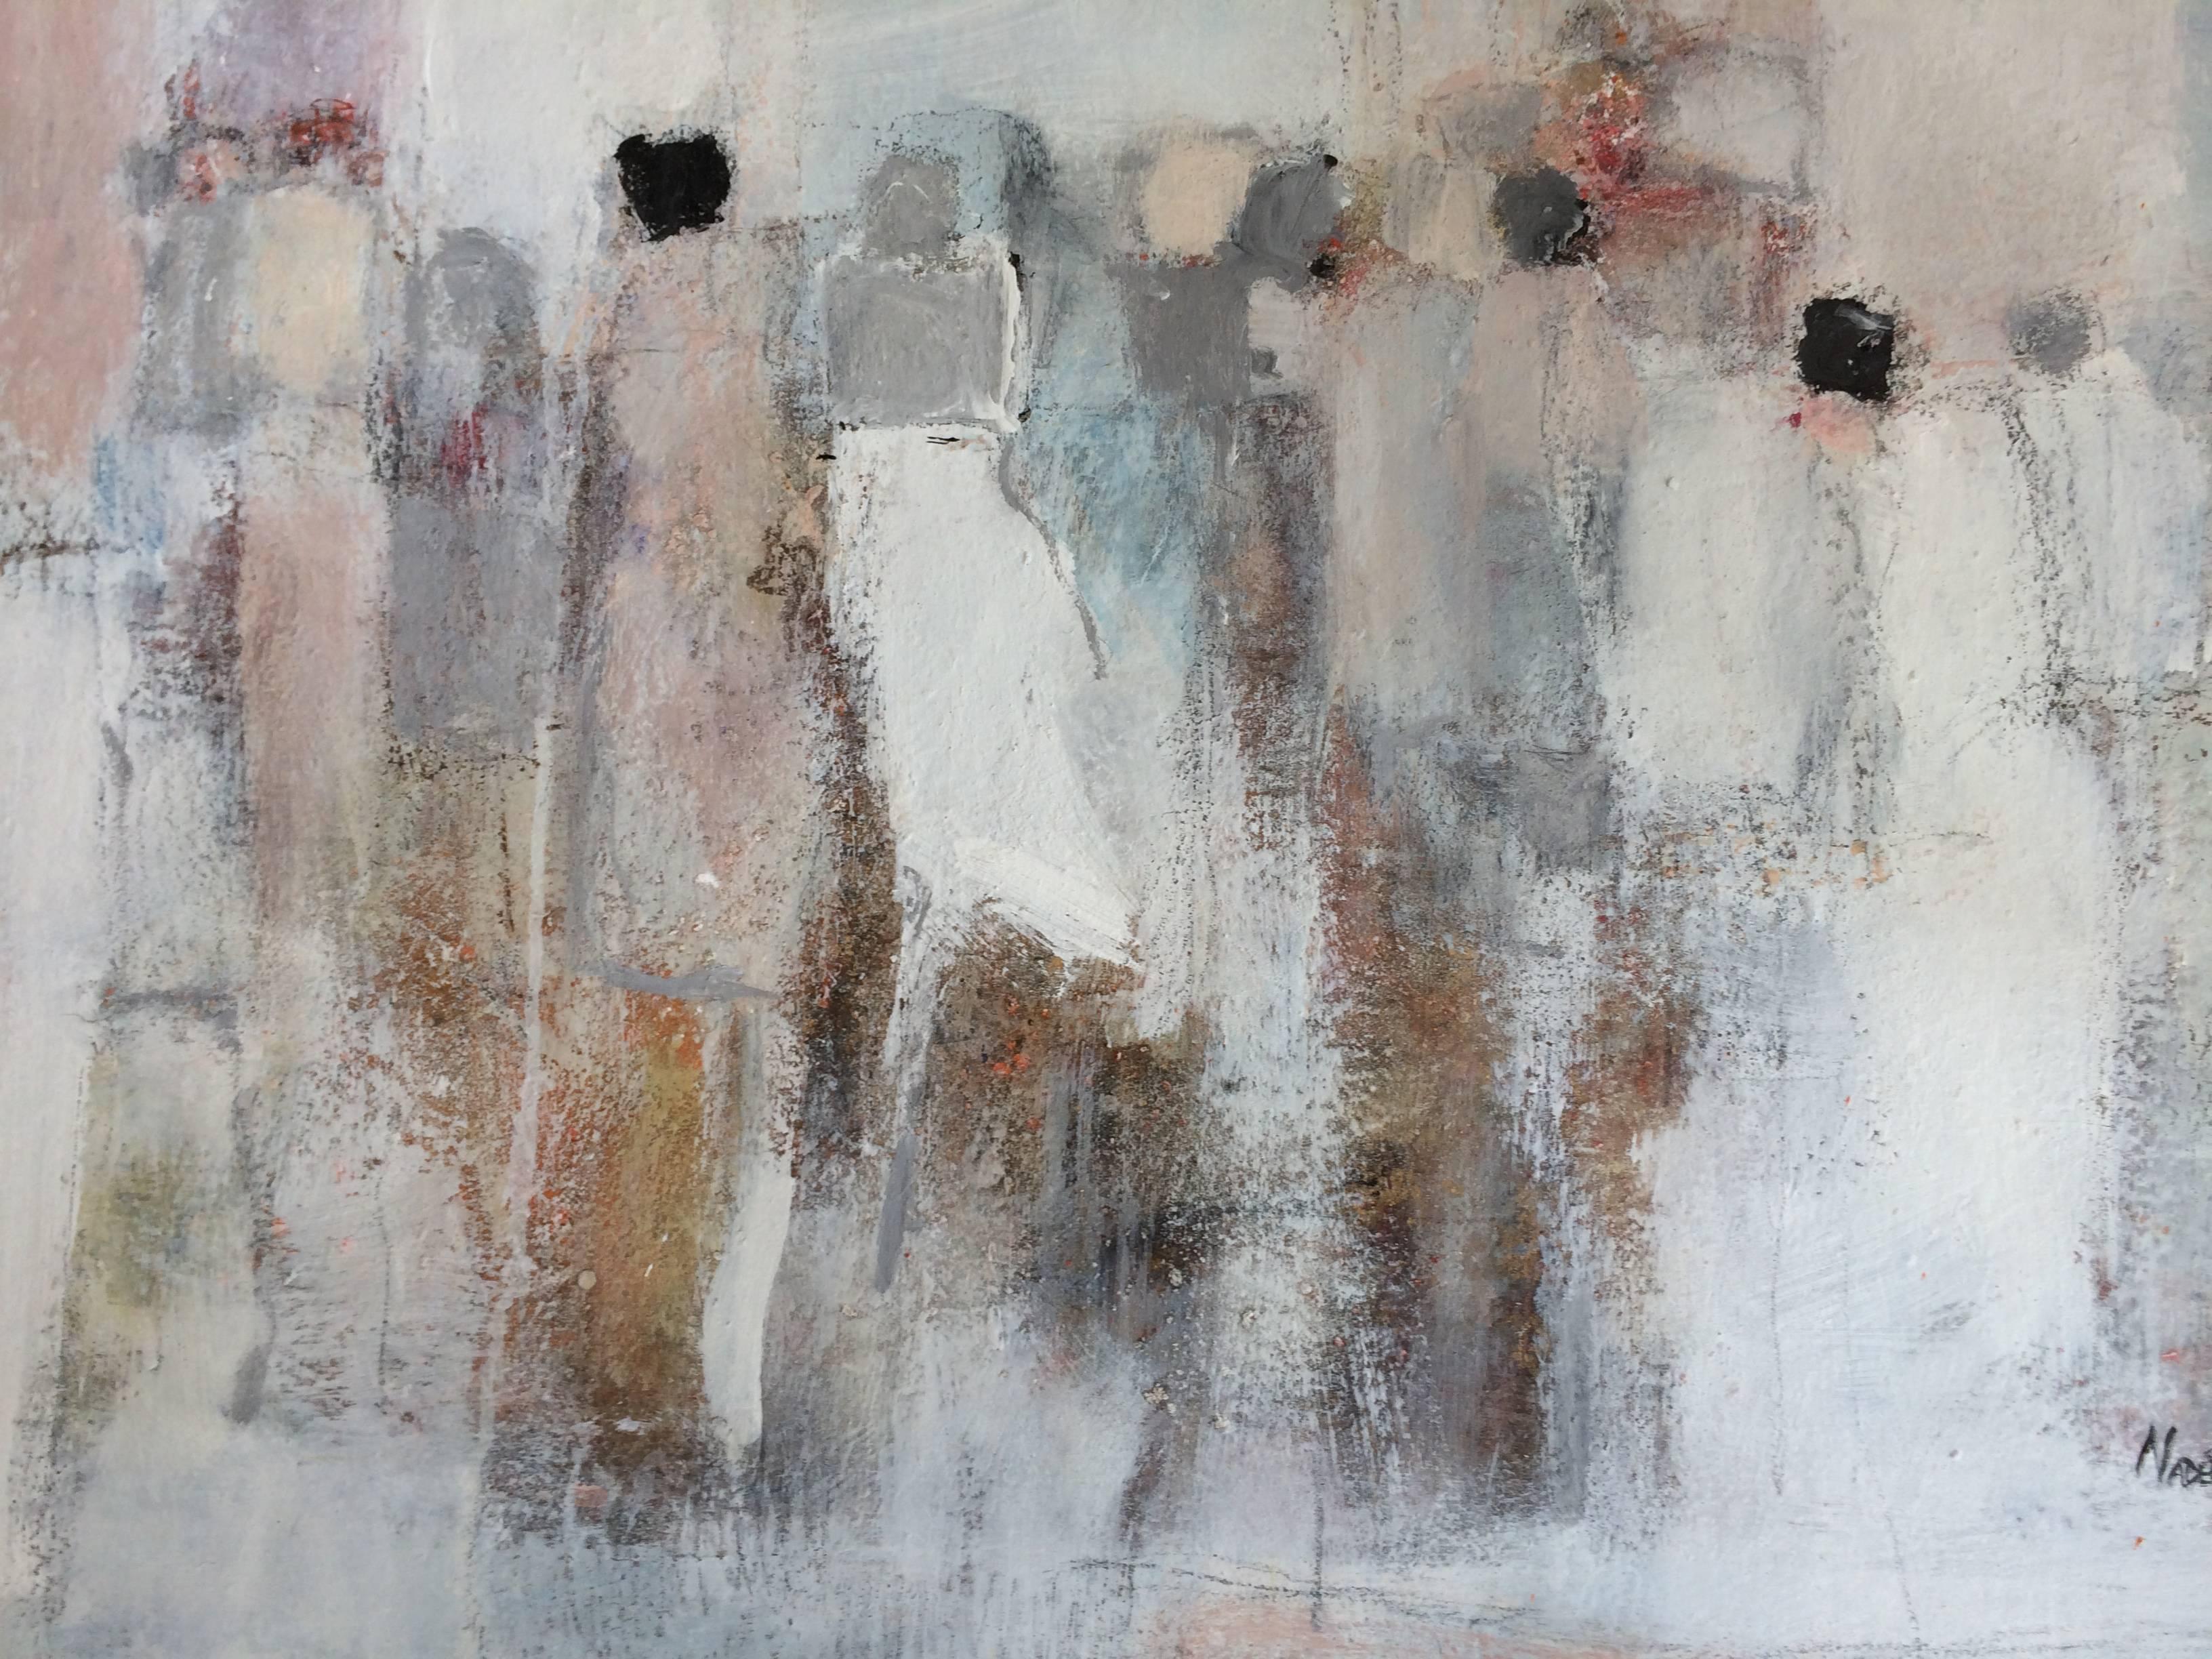 Nadee explores the human figure through trace, movement and memory. Her unique mixed media style balances representation and abstraction as she seeks to create 